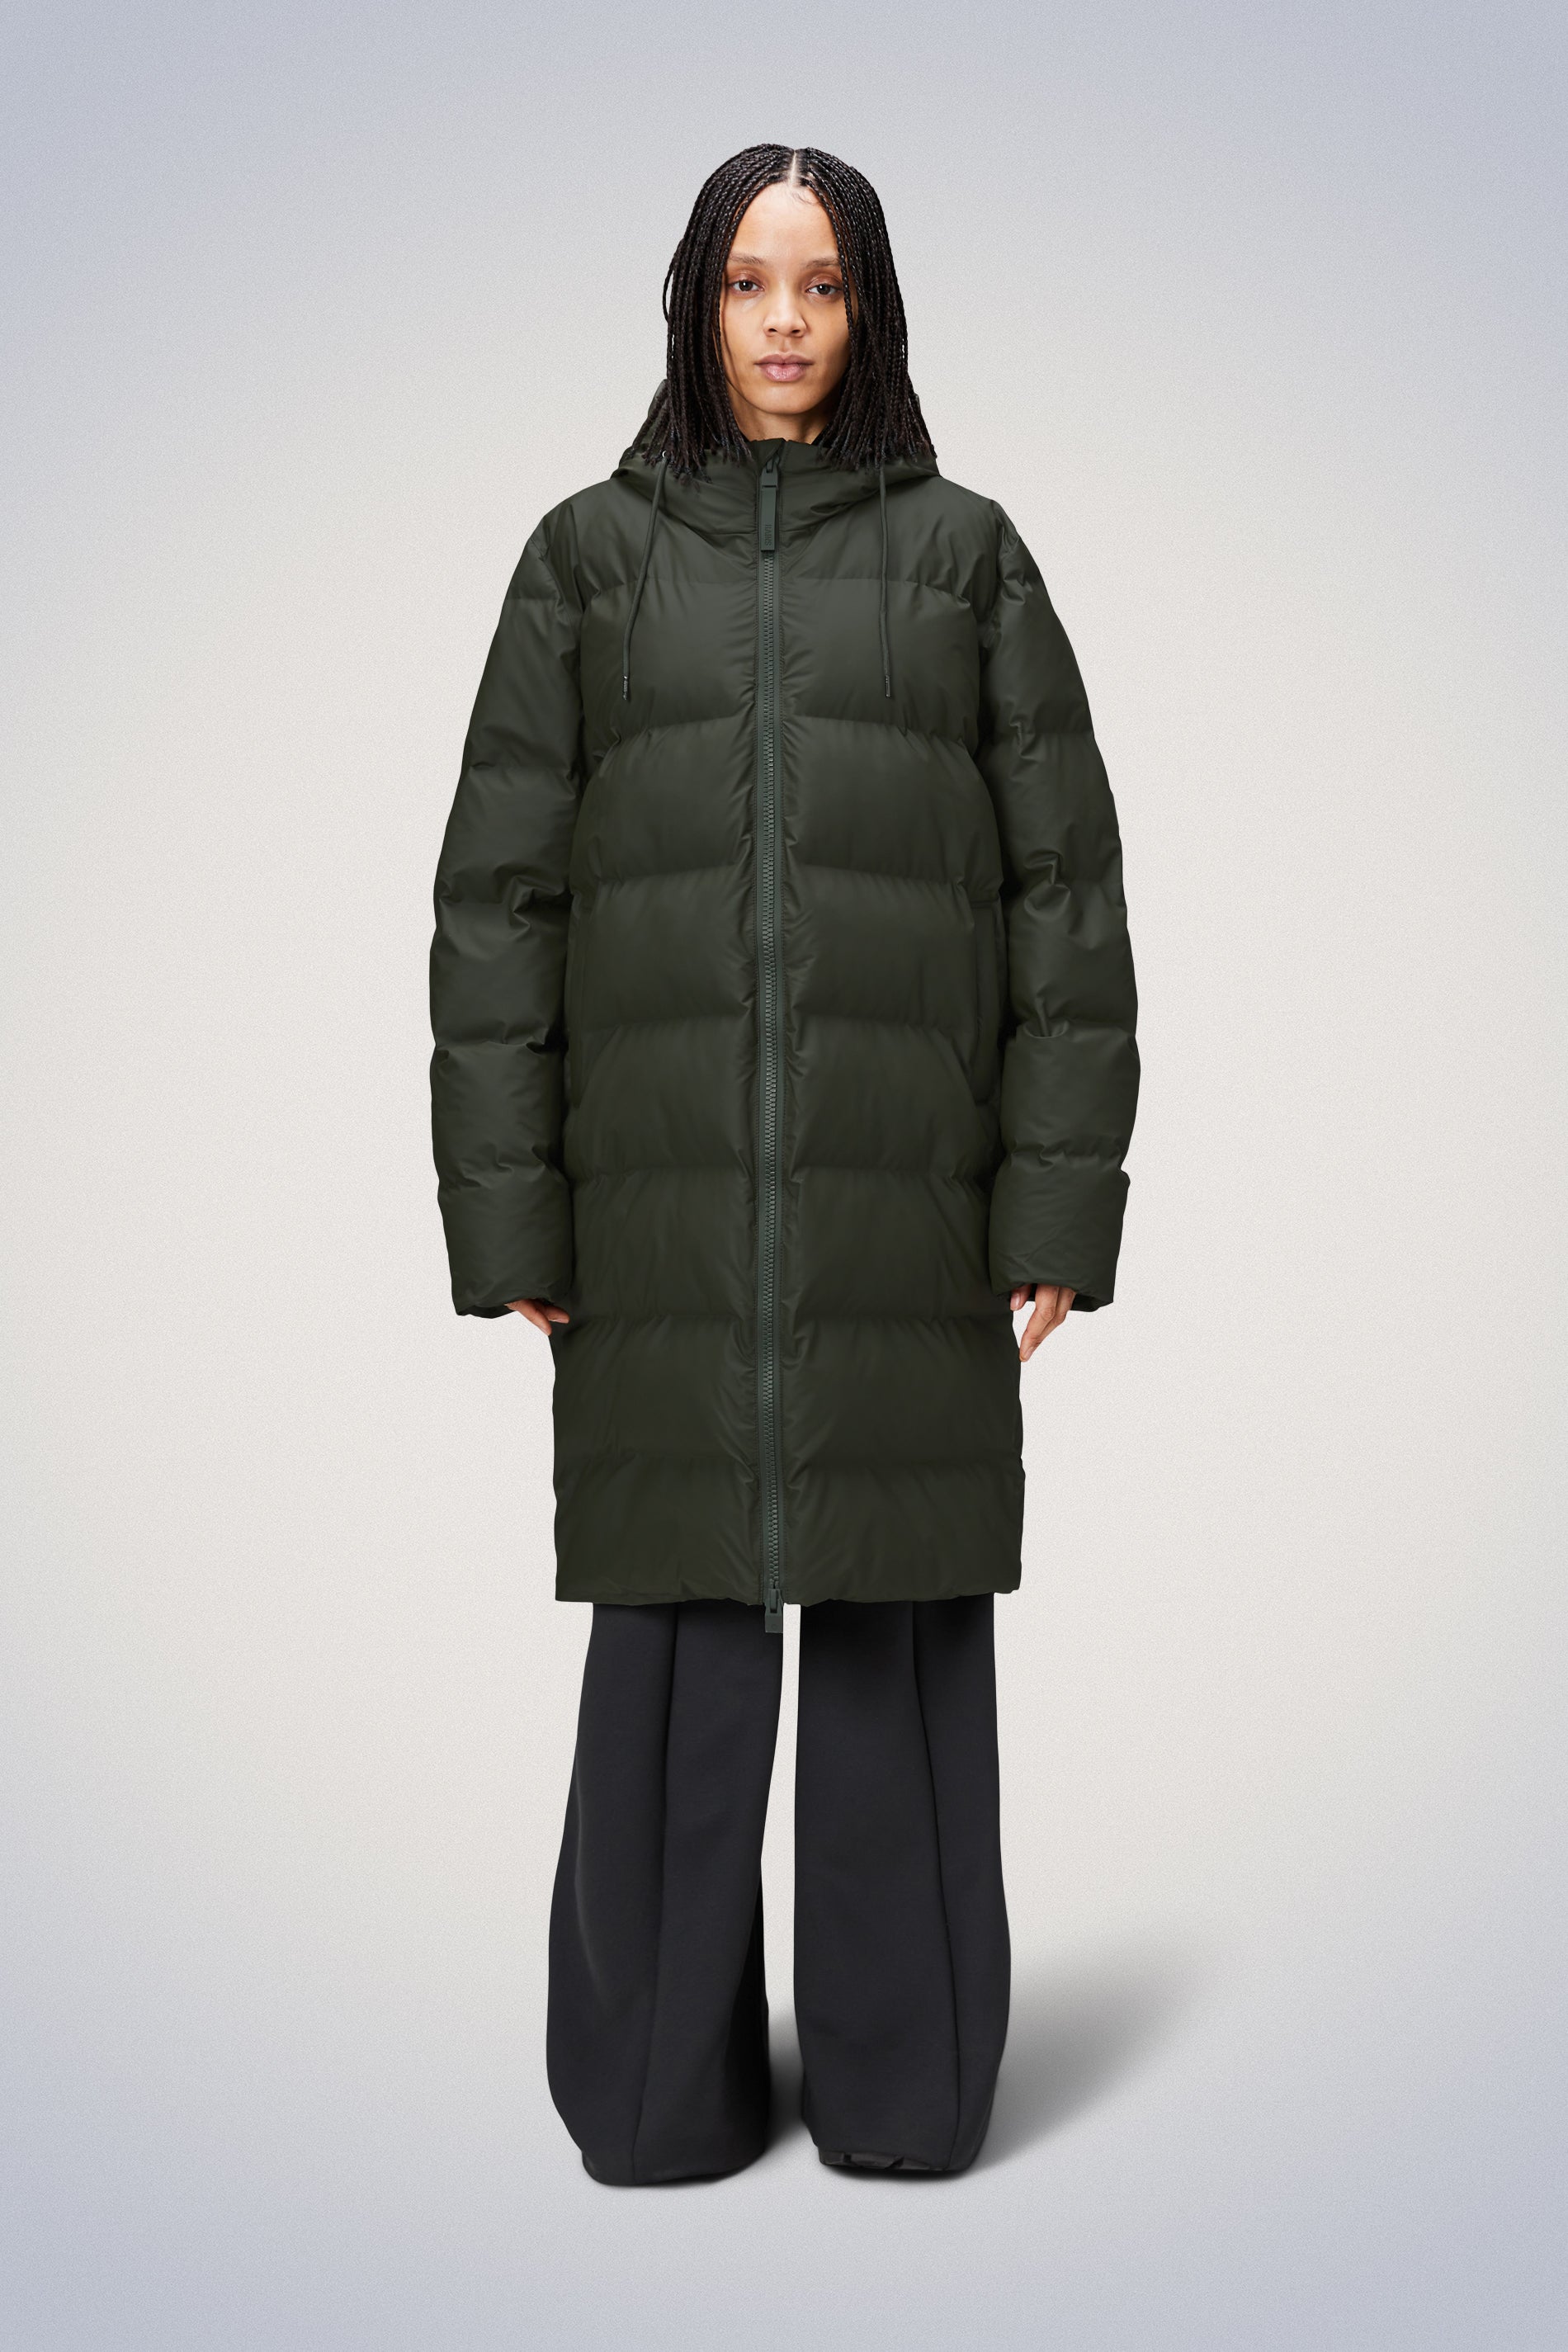 Rains® Alta Long Puffer Jacket in Black for $680